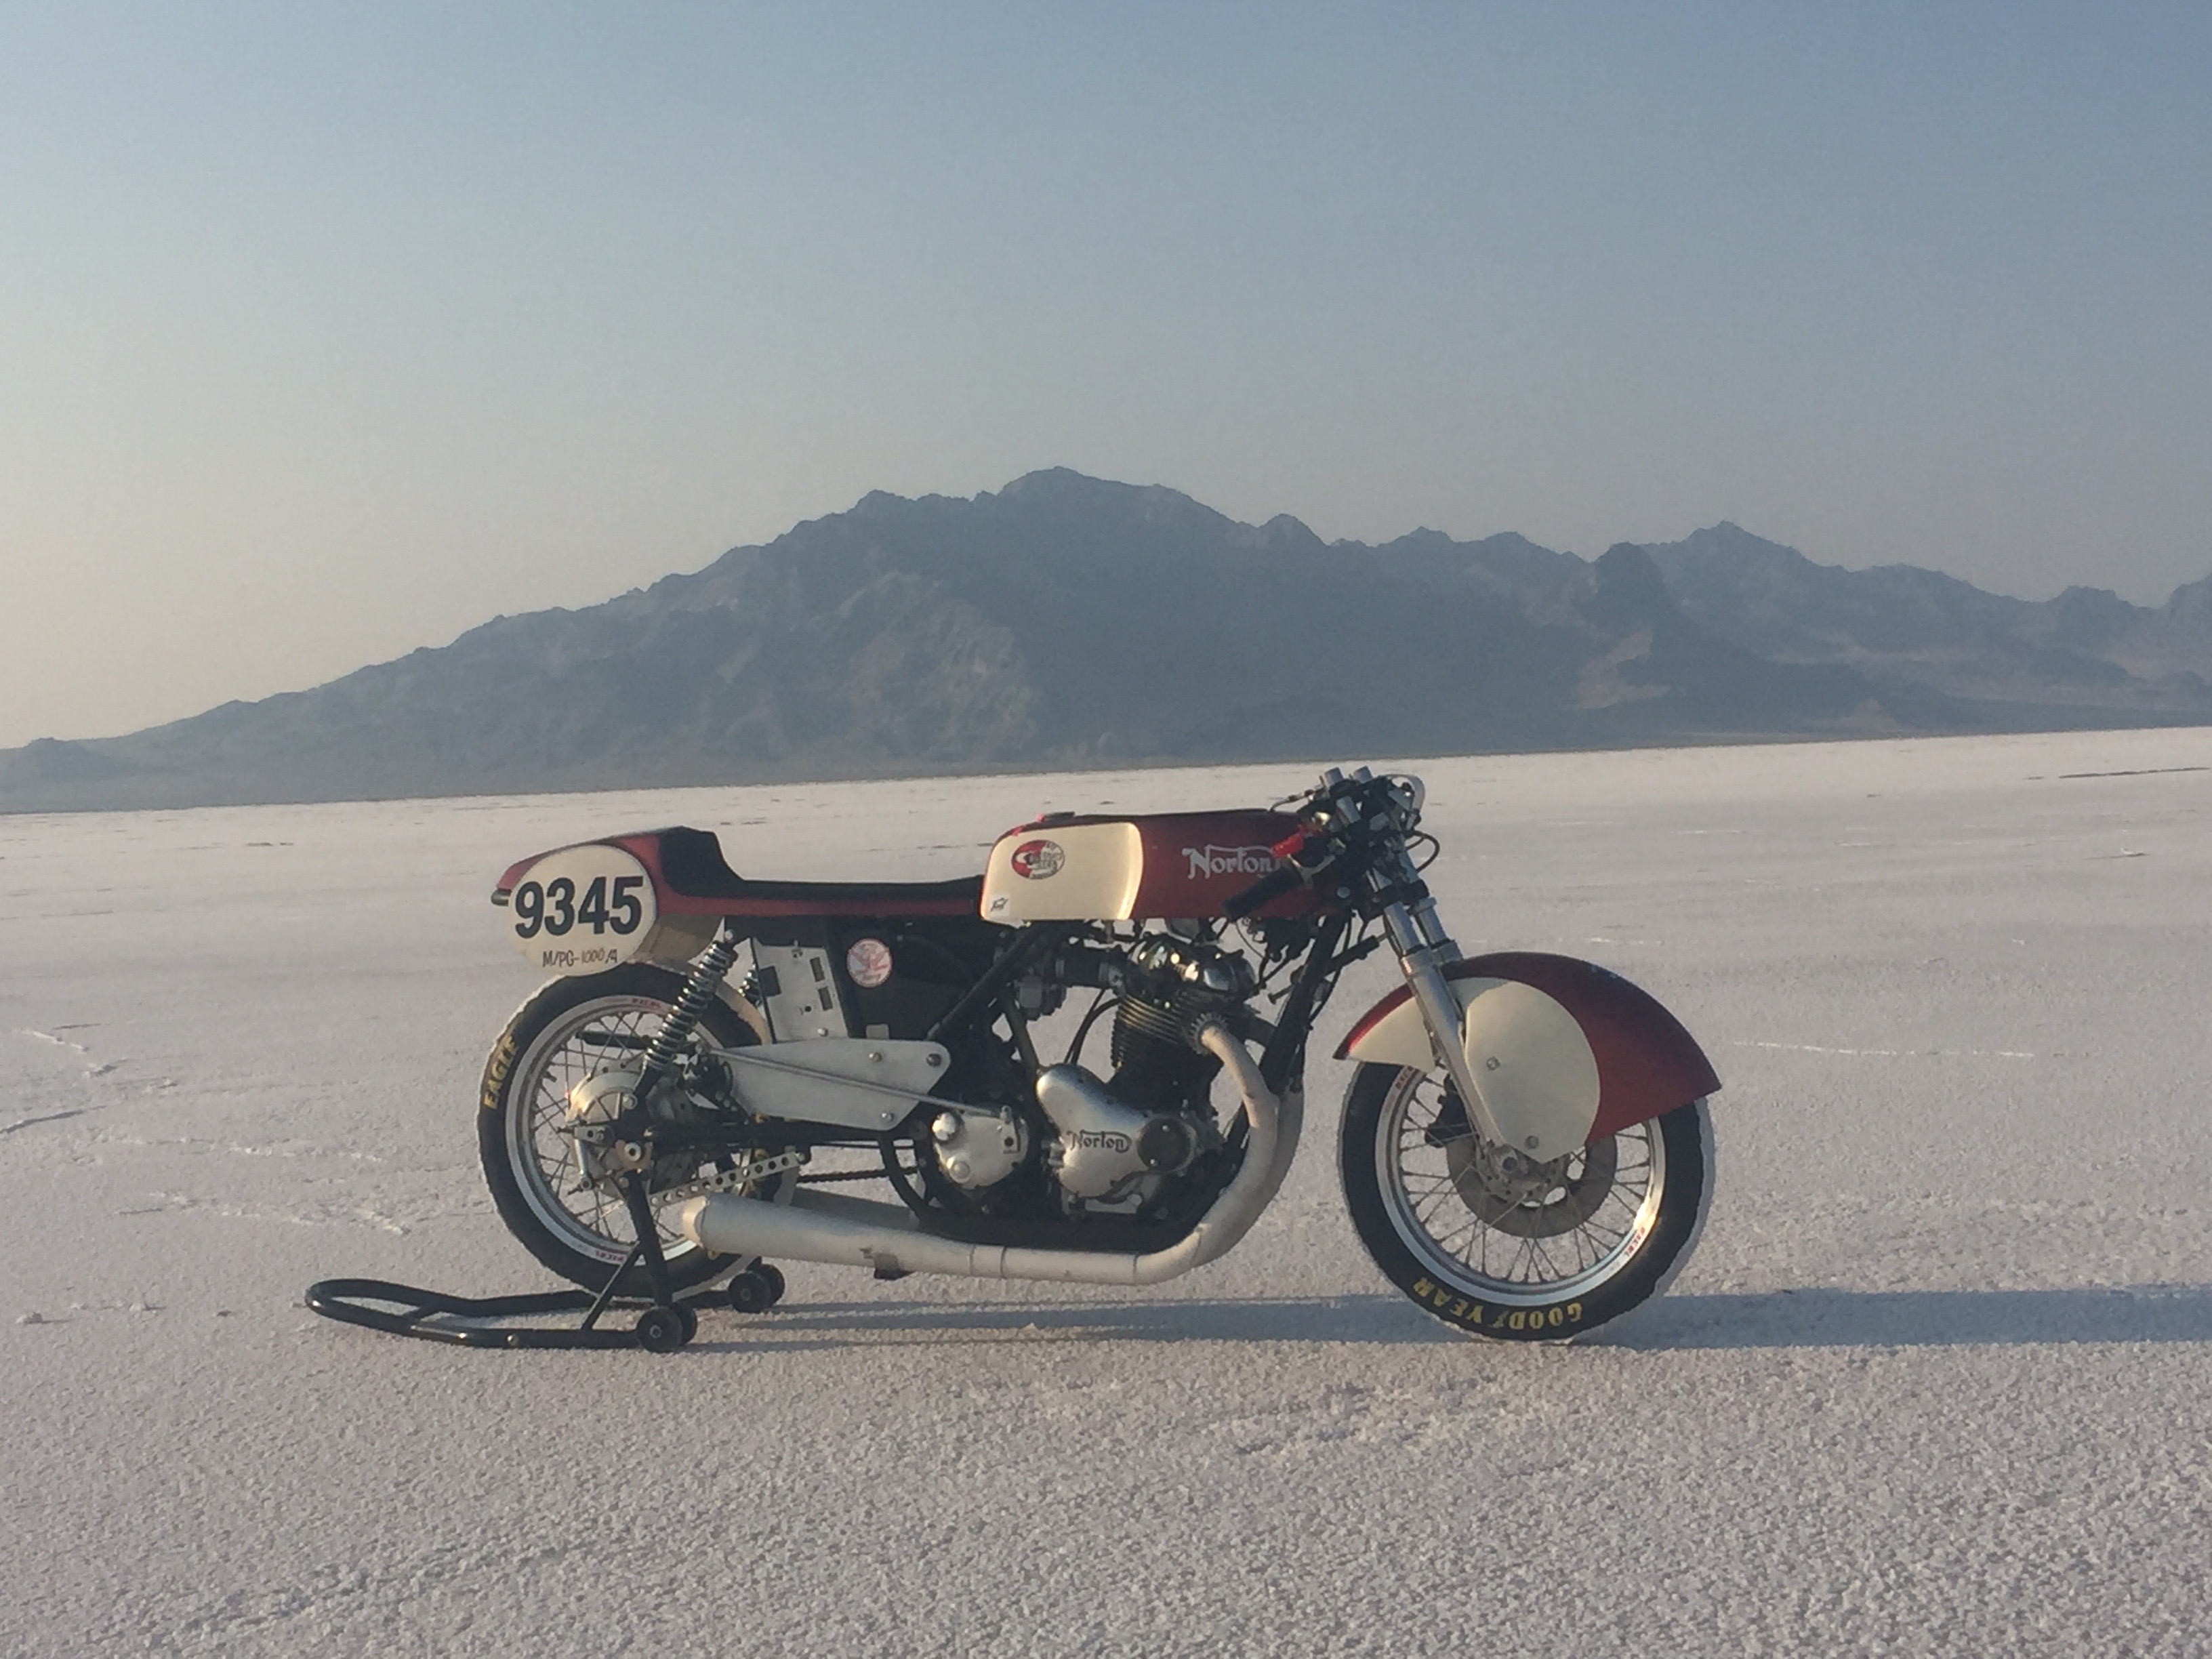 Some pics from our effort at Bonneville Speedweek 2018